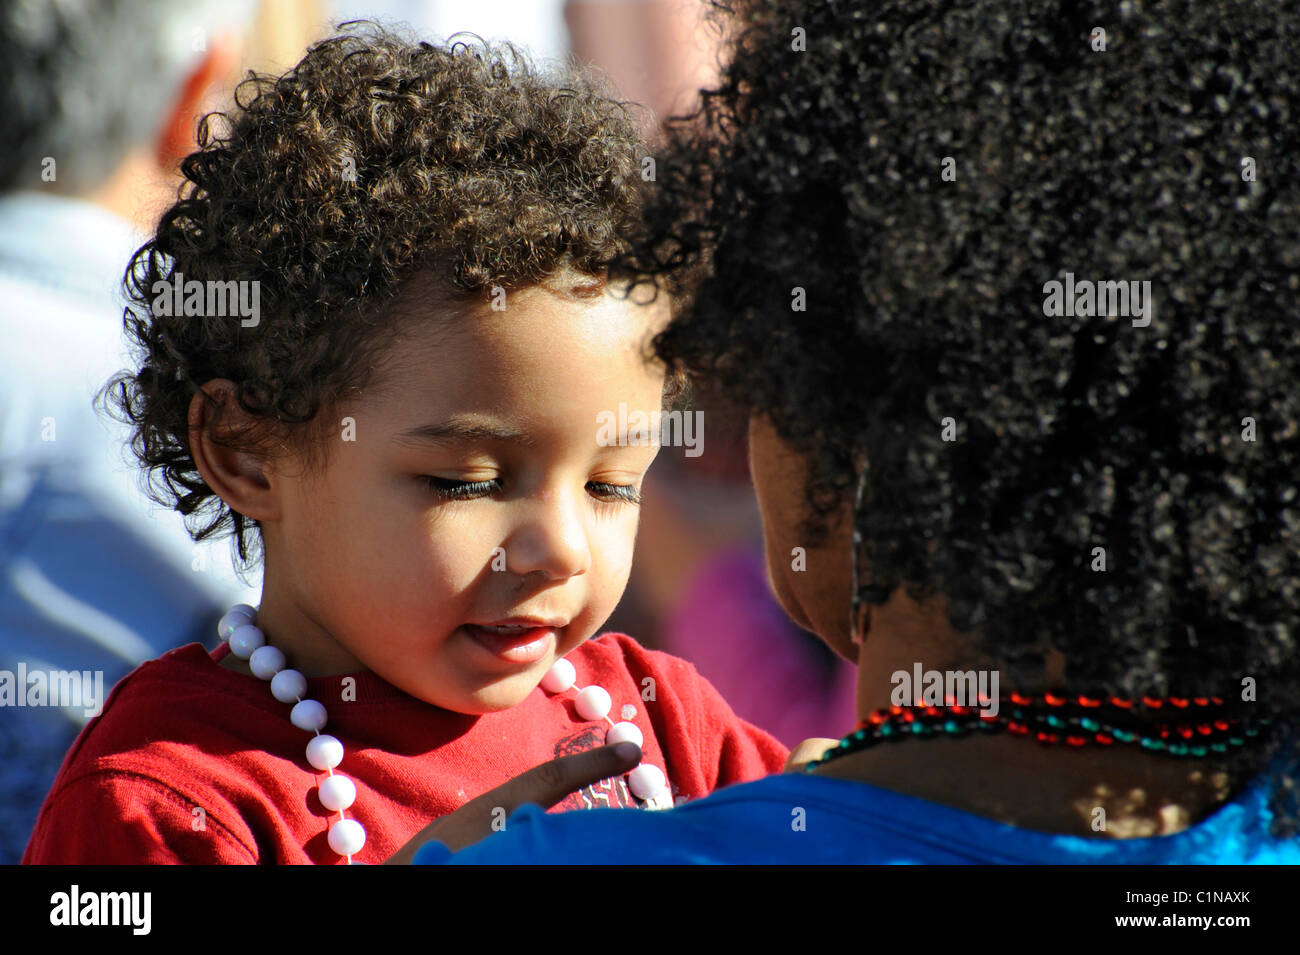 Young African American child with mother at annual Tampa Florida Gasparilla Pirate Festival Parade Stock Photo